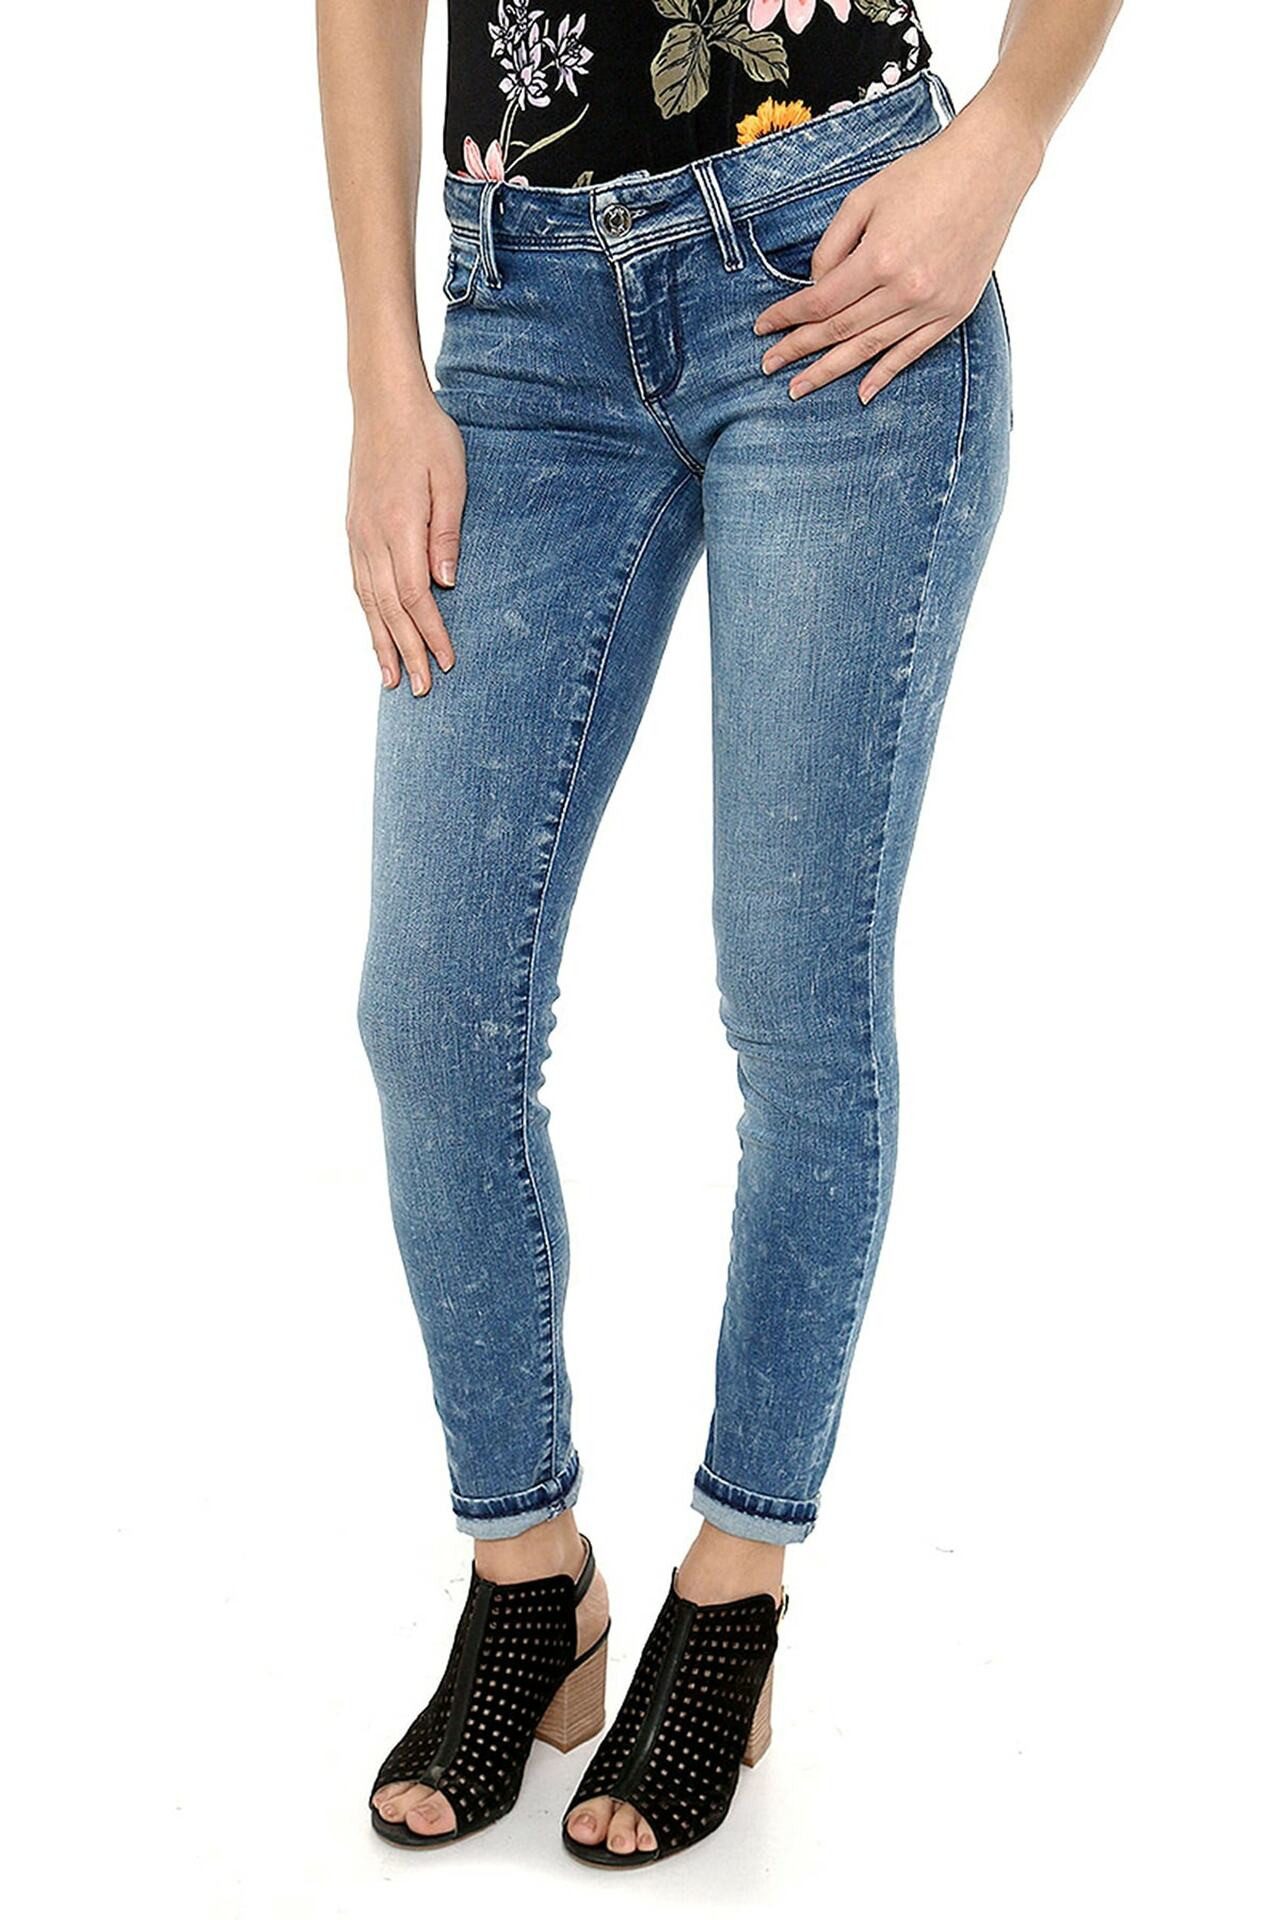 Guess Skinny-fit-Jeans Jeans Hose Hohe Taille, Skinny Slim fit, Gr. W30